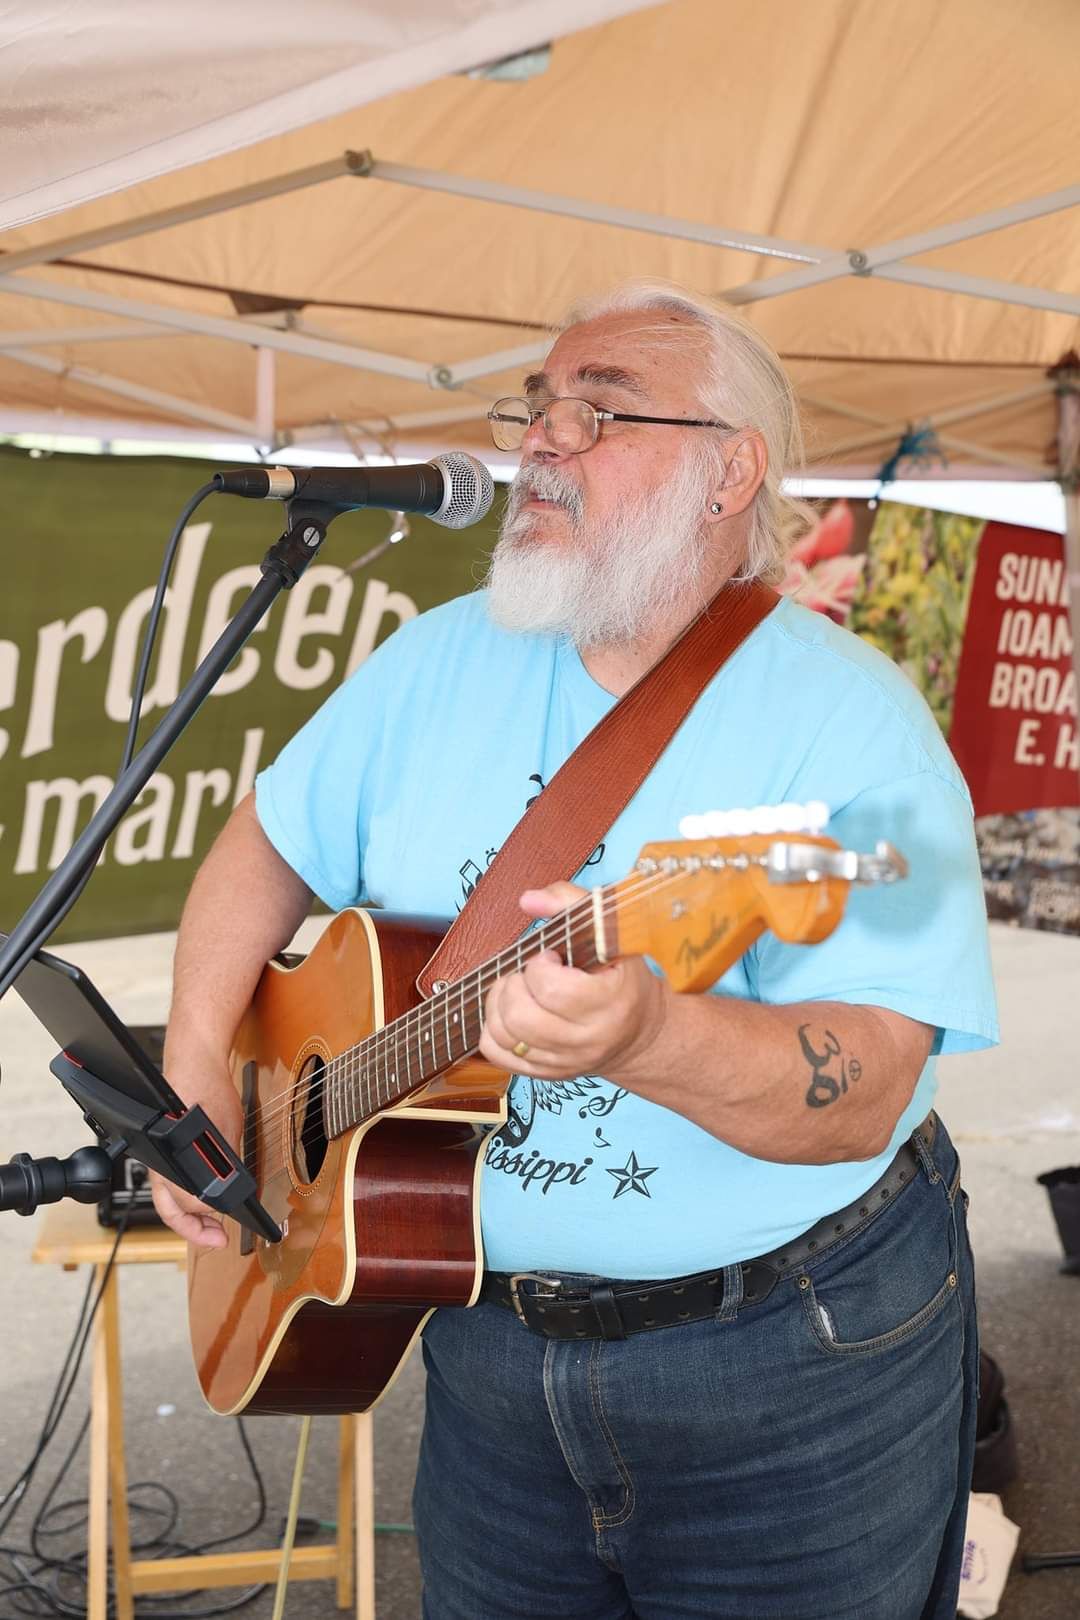 Chad Shue Busking at the Market